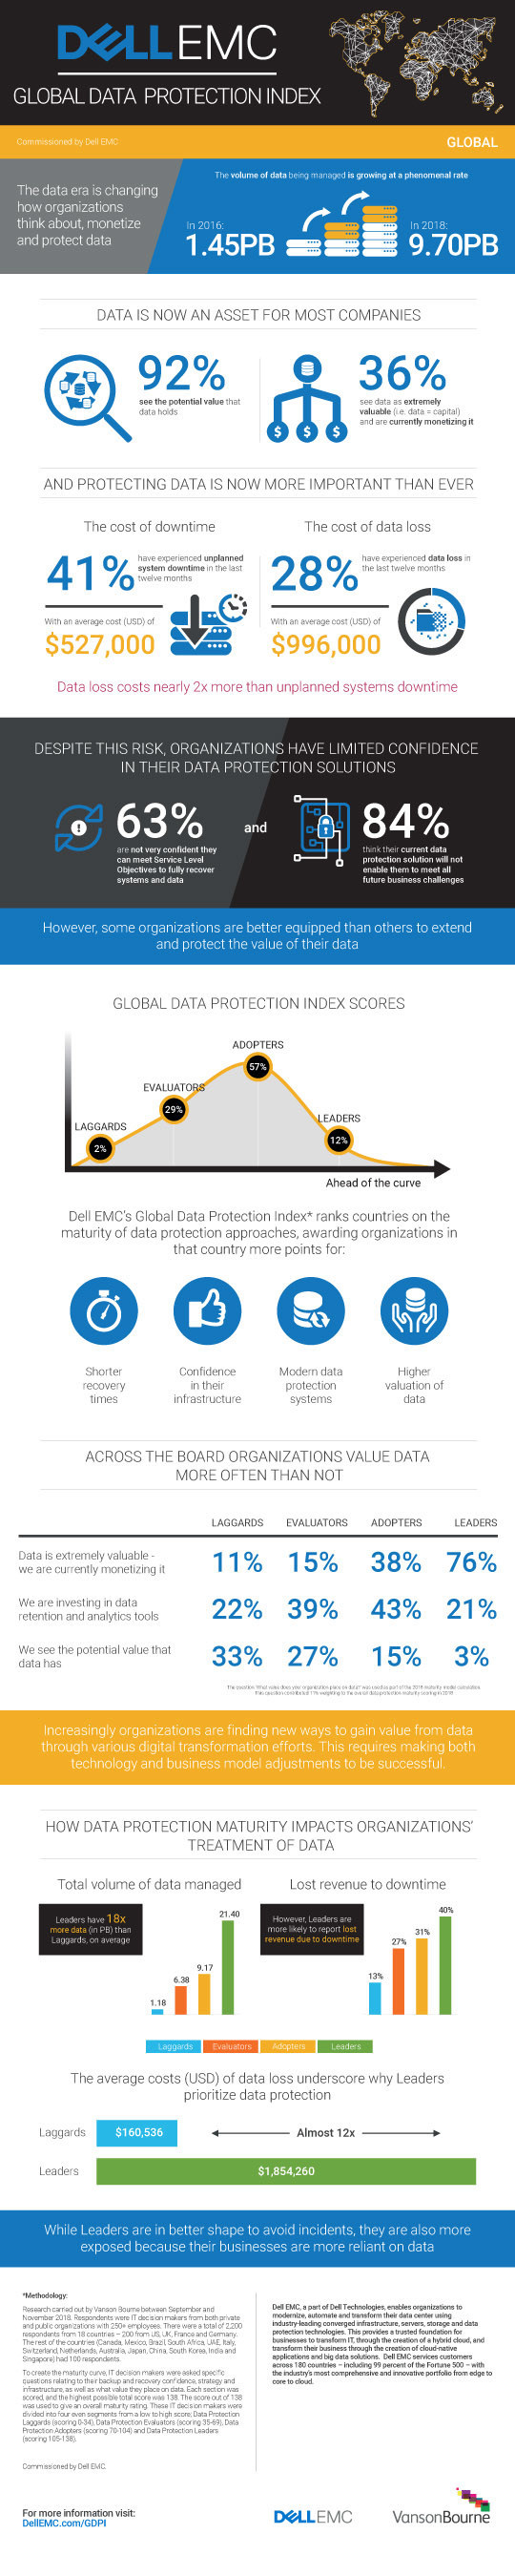 Dell EMC Global Data Protection Index